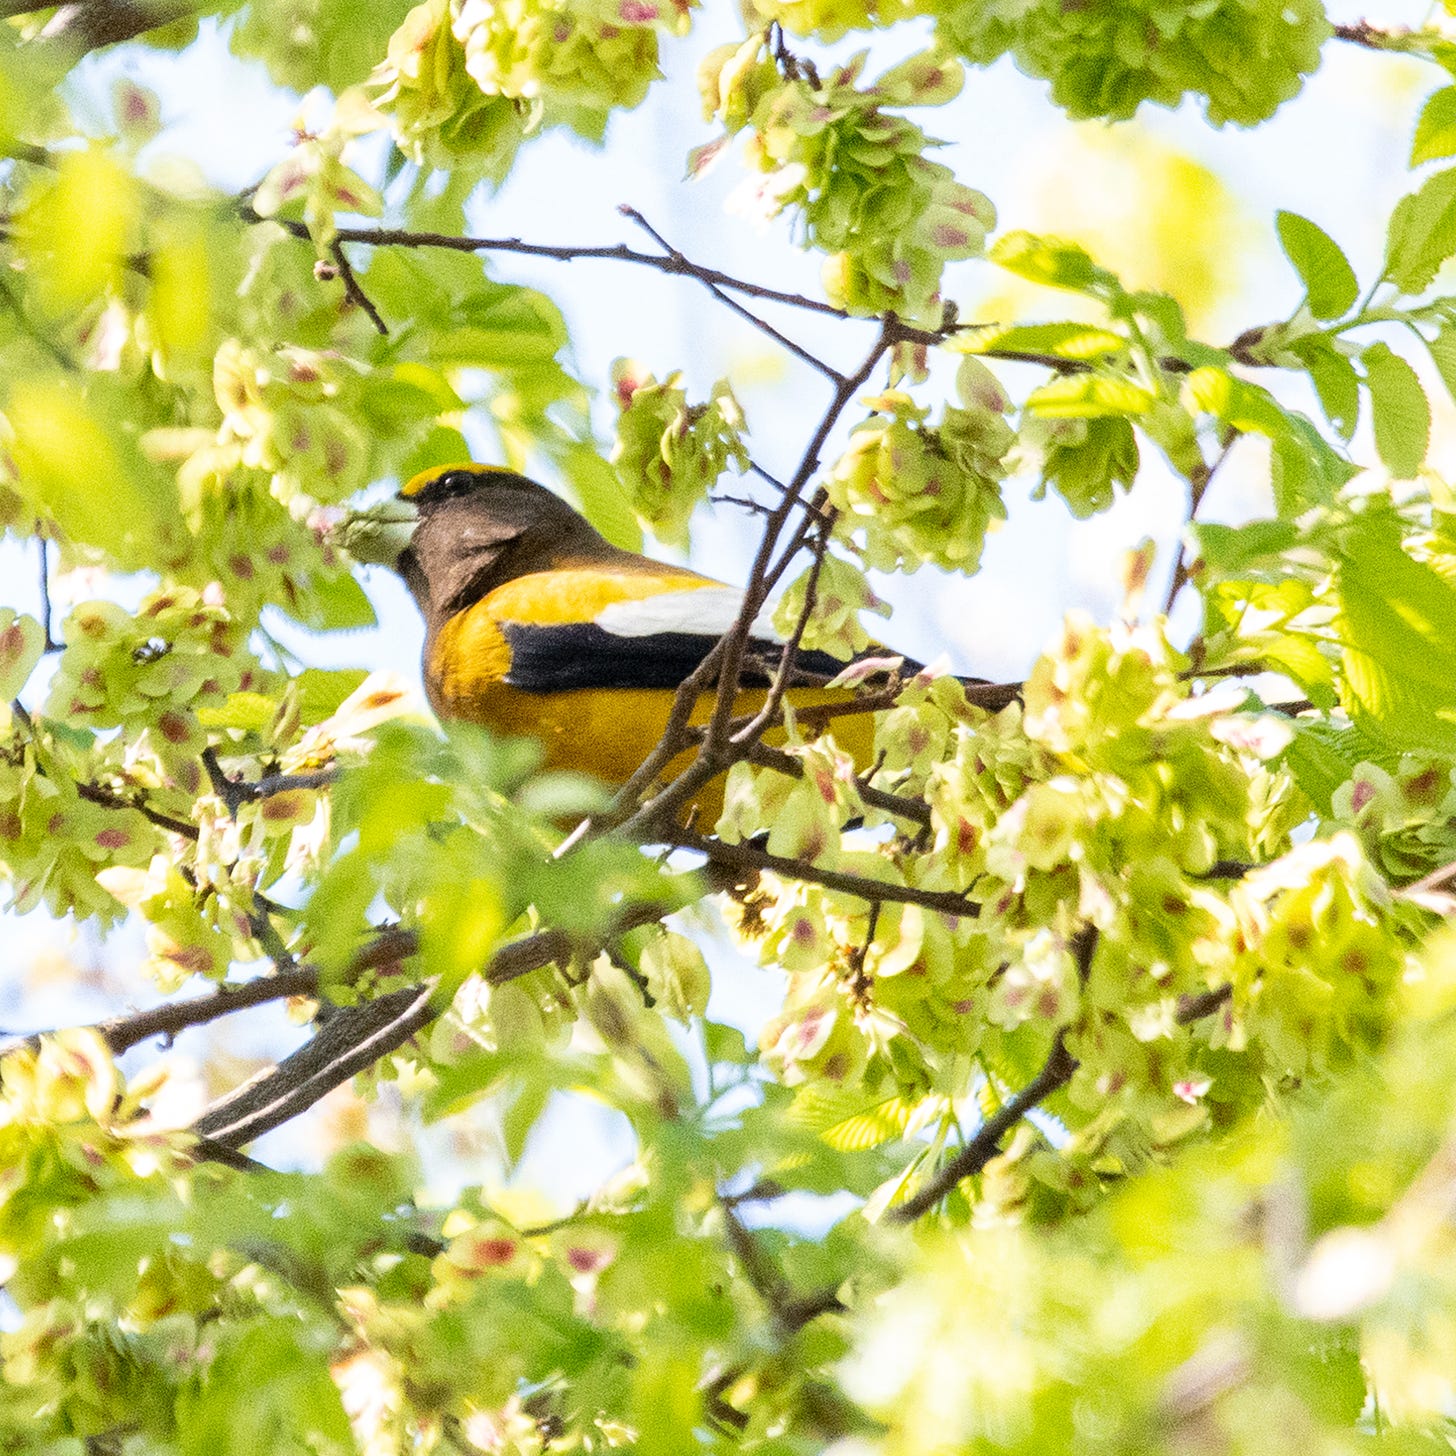 A male evening grosbeak, with a thick yellow eyebrow, q mint green beak, and a black stripe on his wings, is munching gluttonously on a slippery elm's early-ripening seeds, which are papery and green